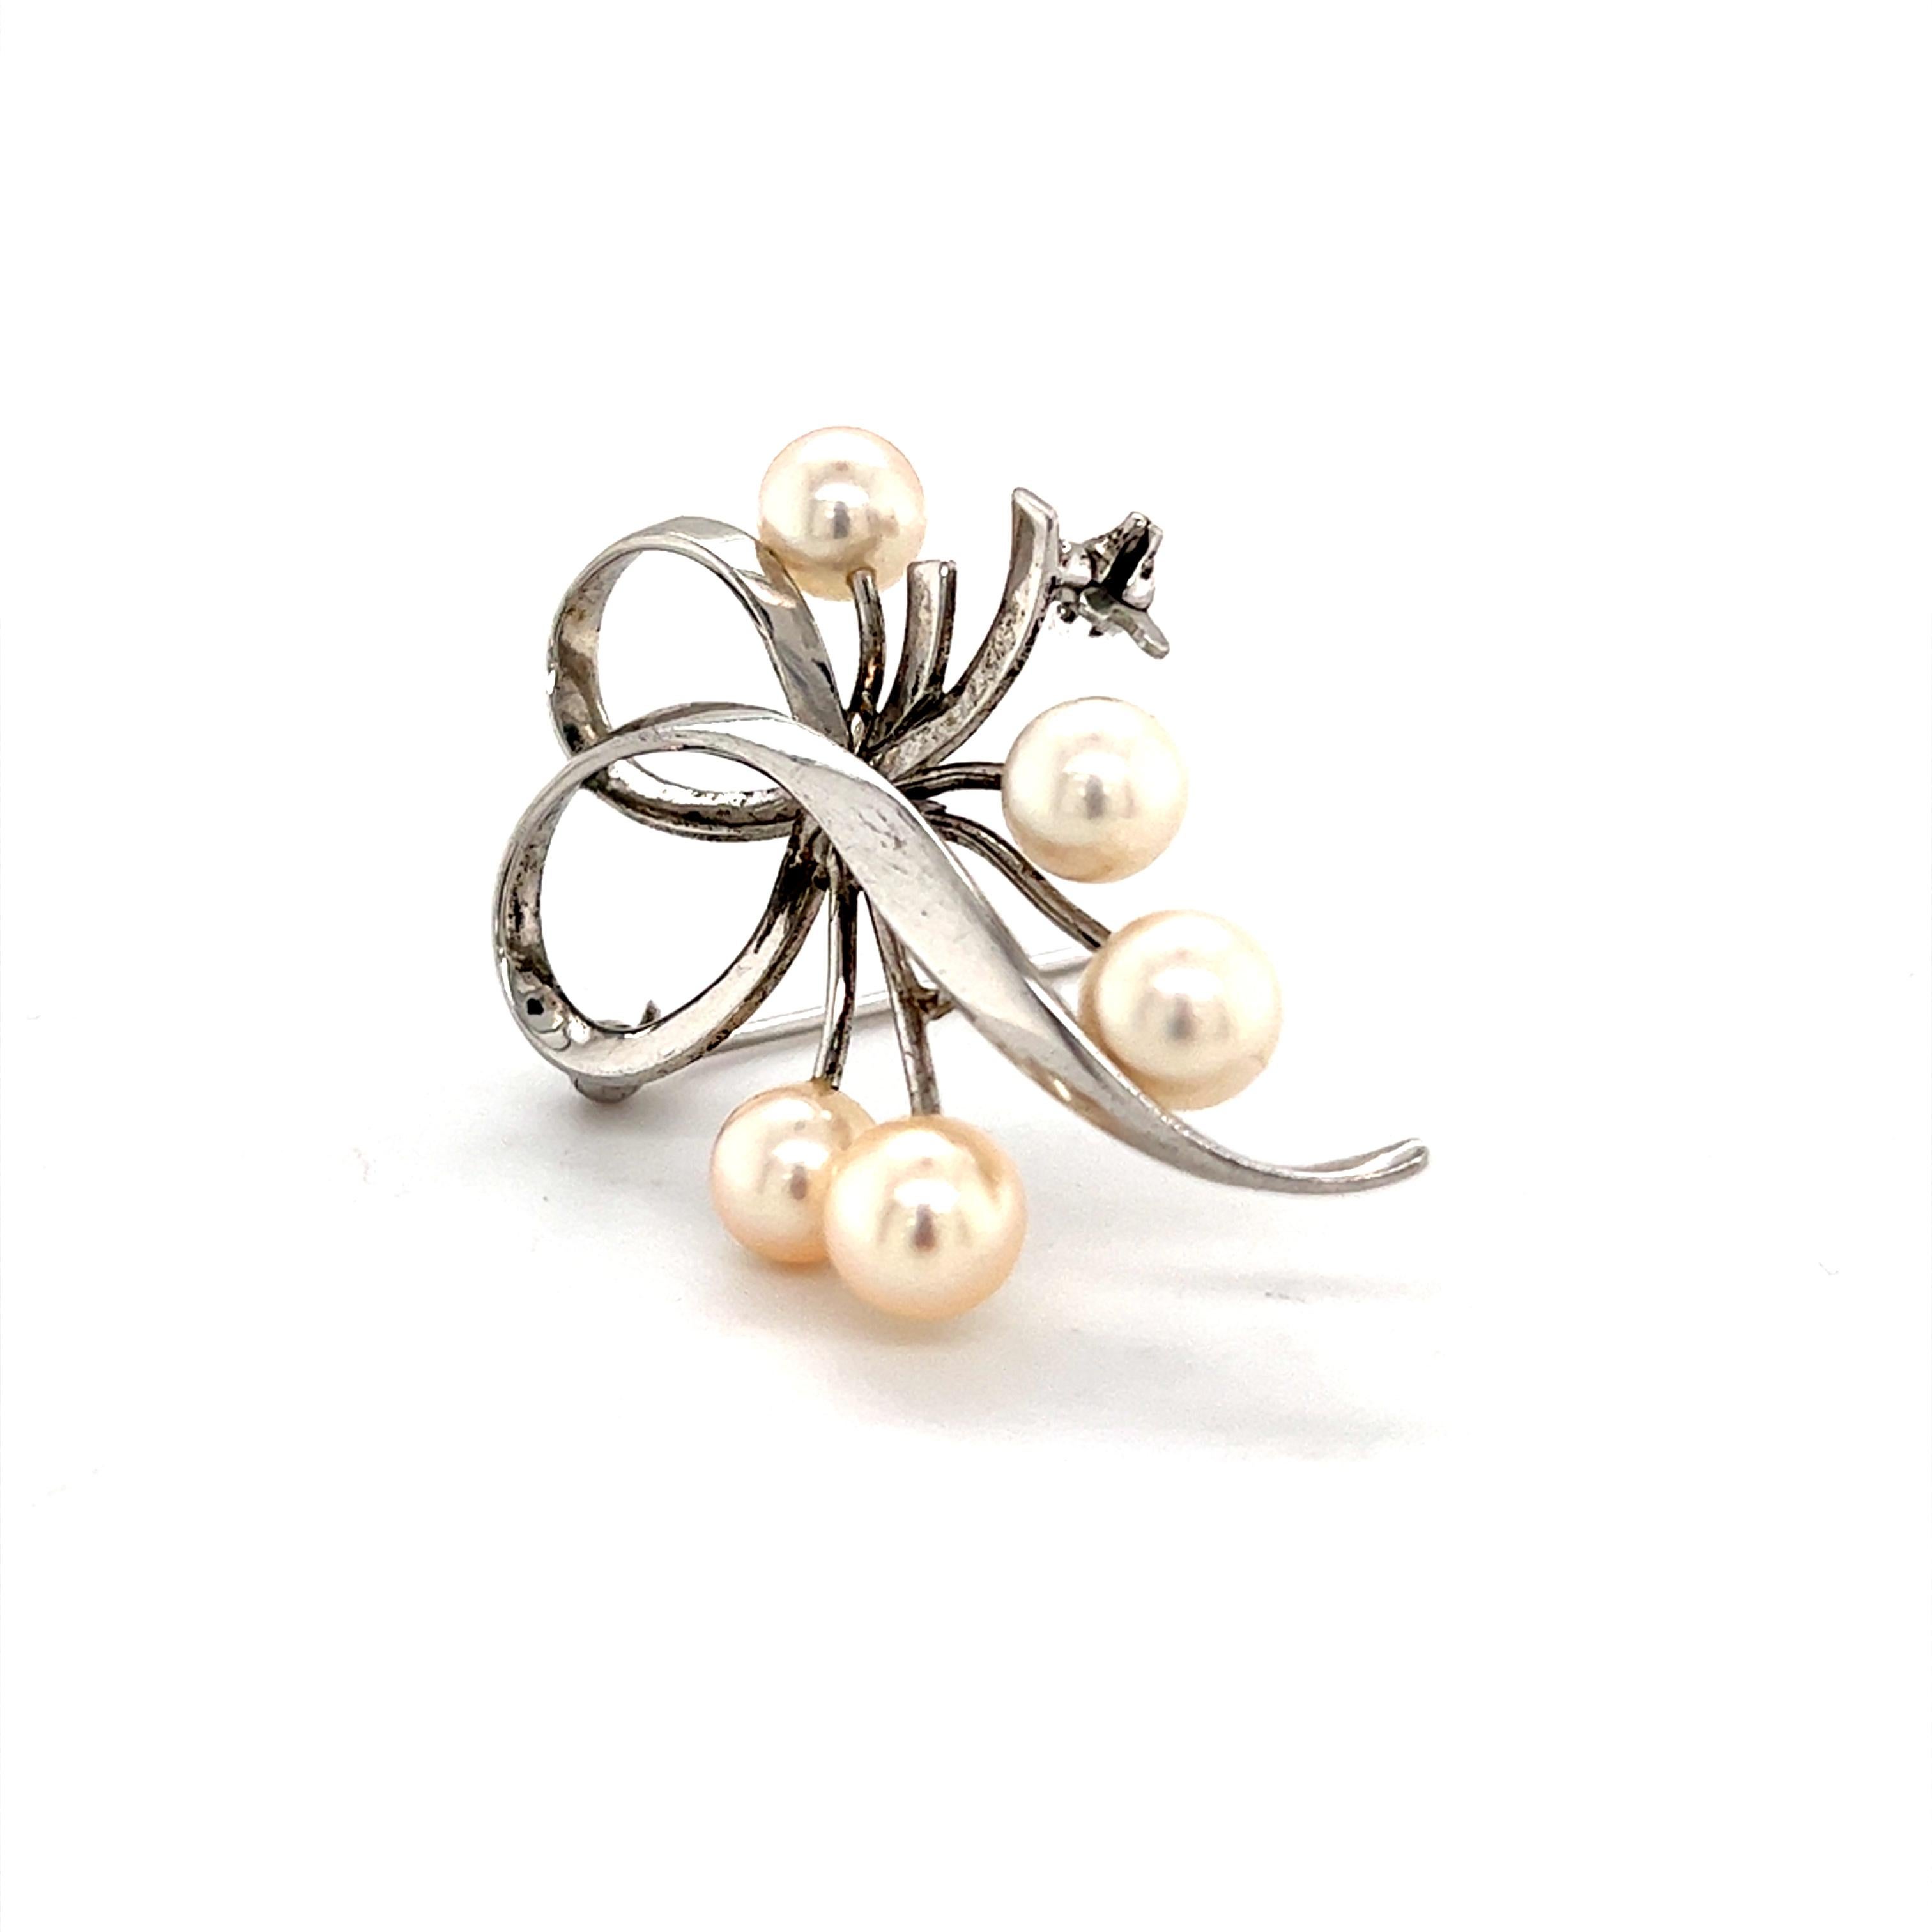 Mikimoto Estate Akoya Pearl Brooch Sterling Silver 6.60 mm 5.2 Grams M257

This elegant Authentic Mikimoto Estate sterling silver brooch has 5 Saltwater Akoya Cultured Pearls and has a weight of 5.2 Grams.

TRUSTED SELLER SINCE 2002

PLEASE SEE OUR